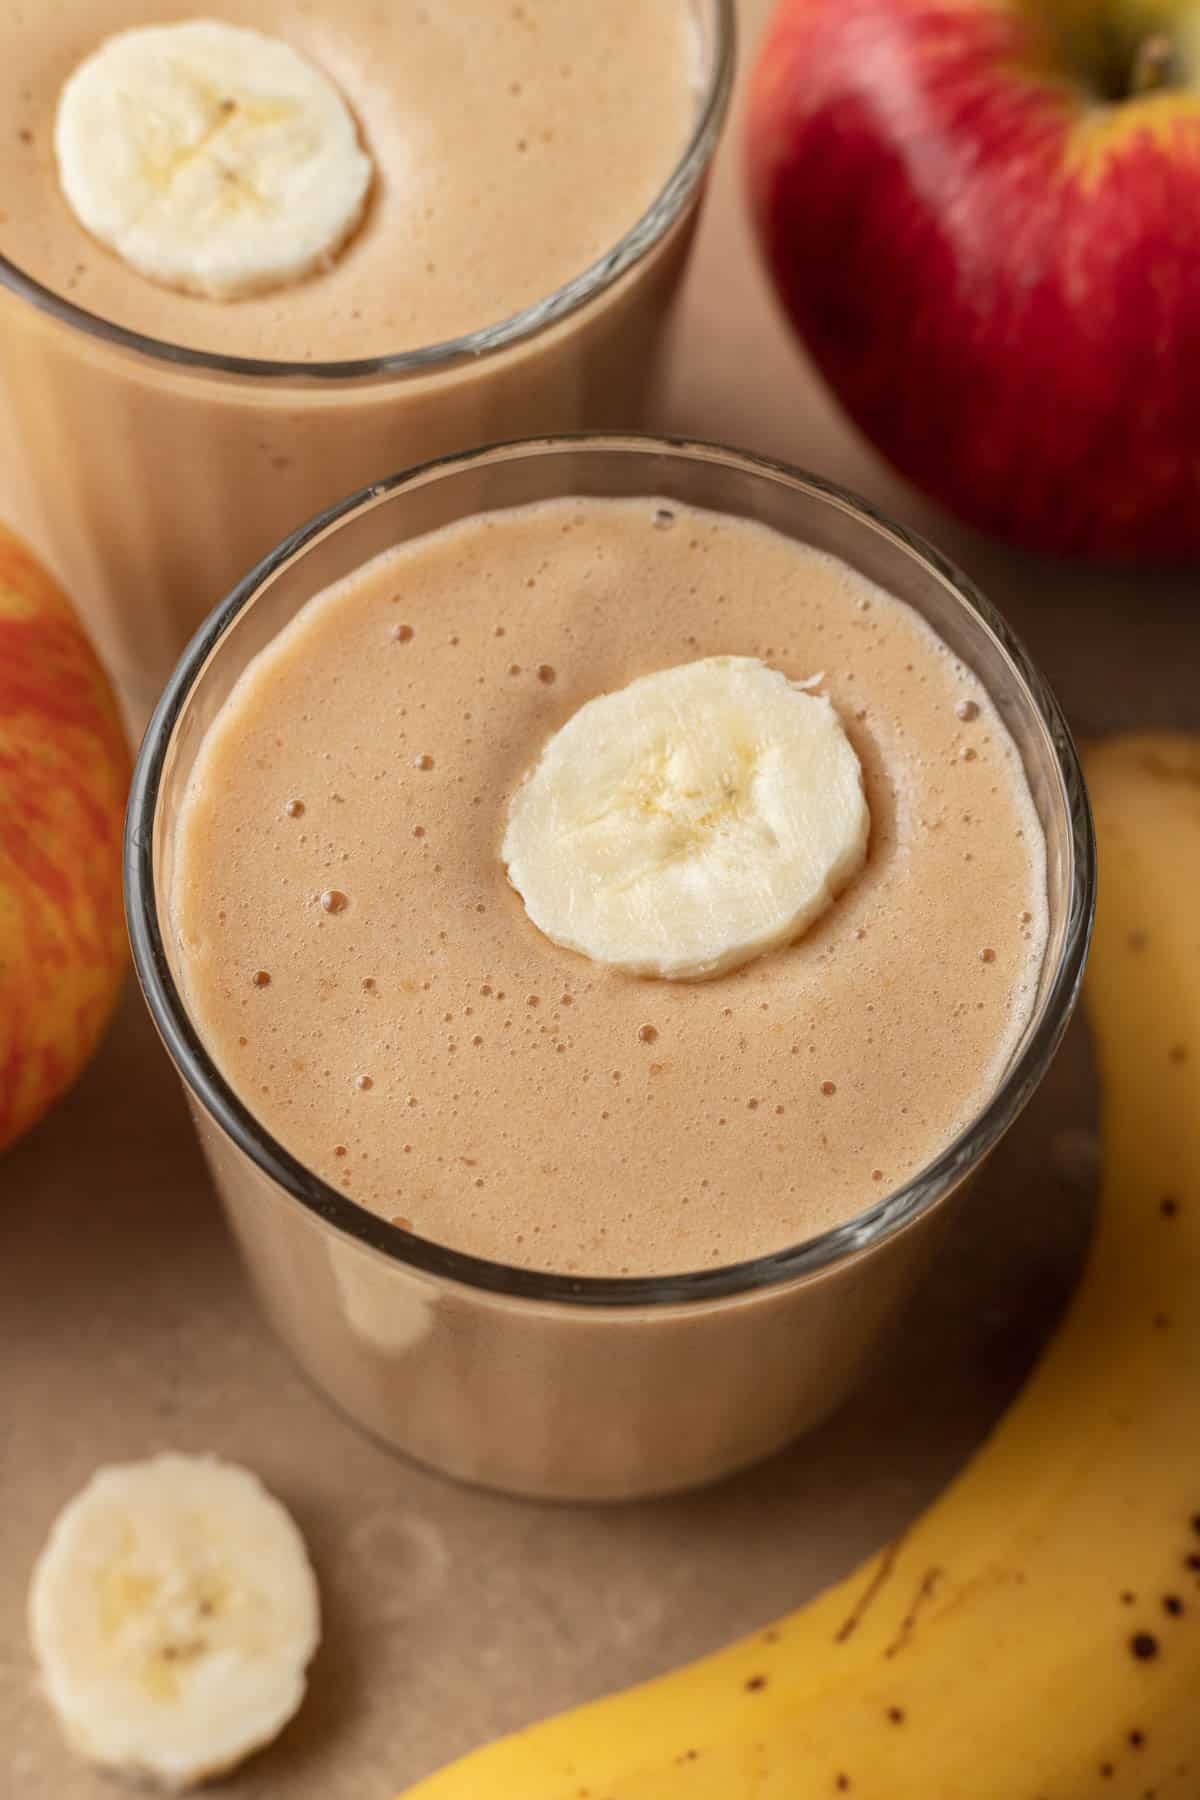 close up view of apple banana smoothie in a clear glass with a slice of banana on top. an apple and a banana are sitting next to the smoothie on a tan backdrop.